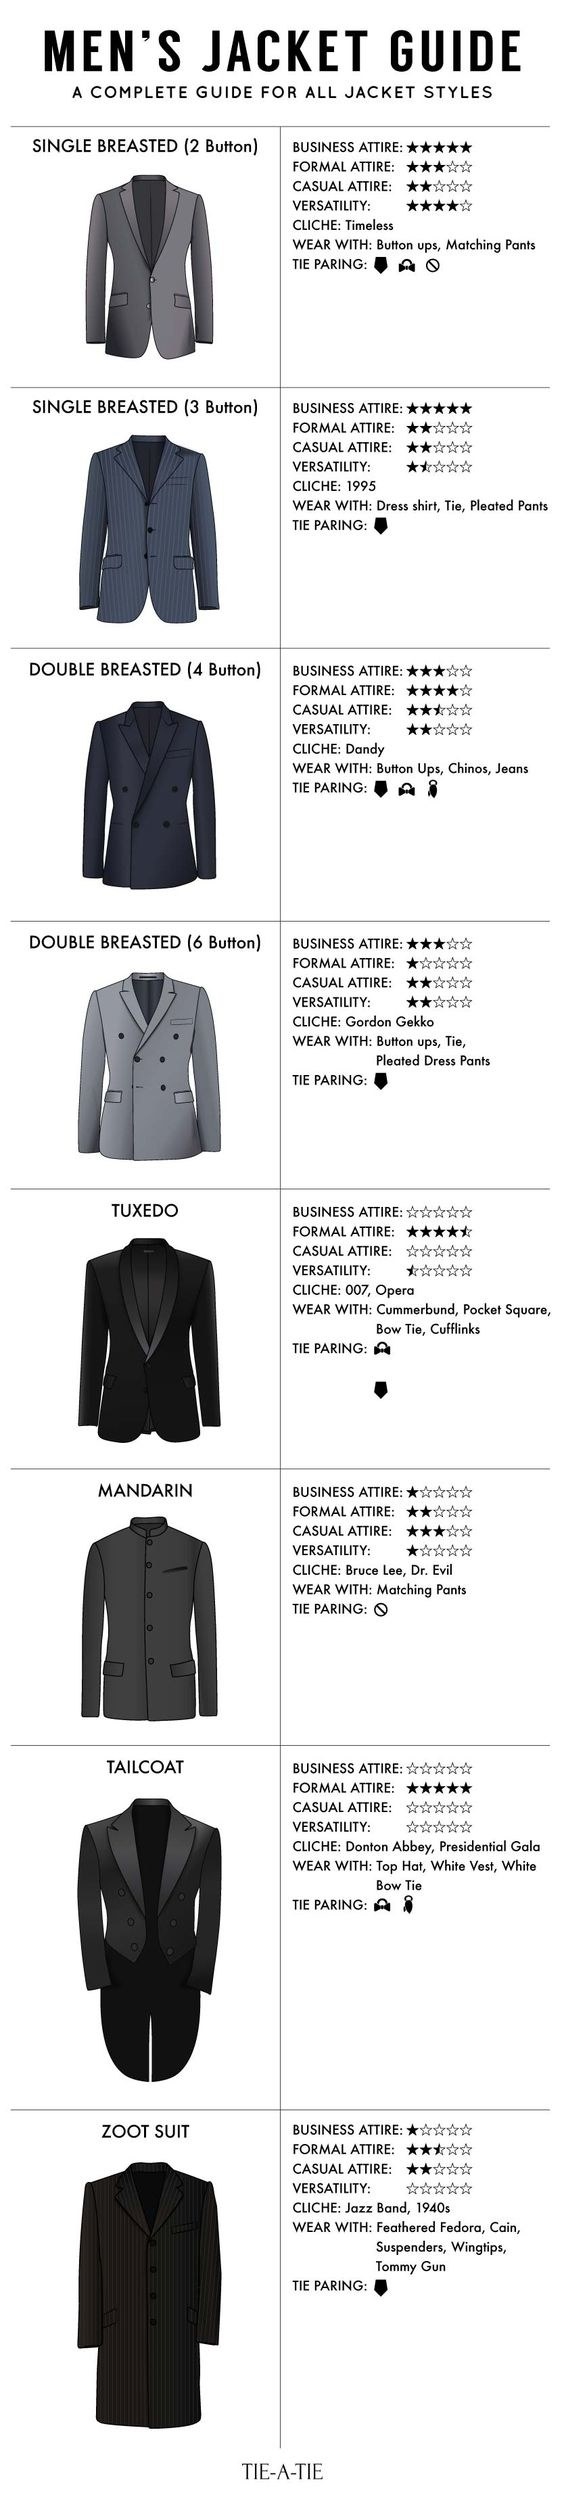 31 Simple Style Cheat Sheets For Guys Who Don't Know WTF They're Doing